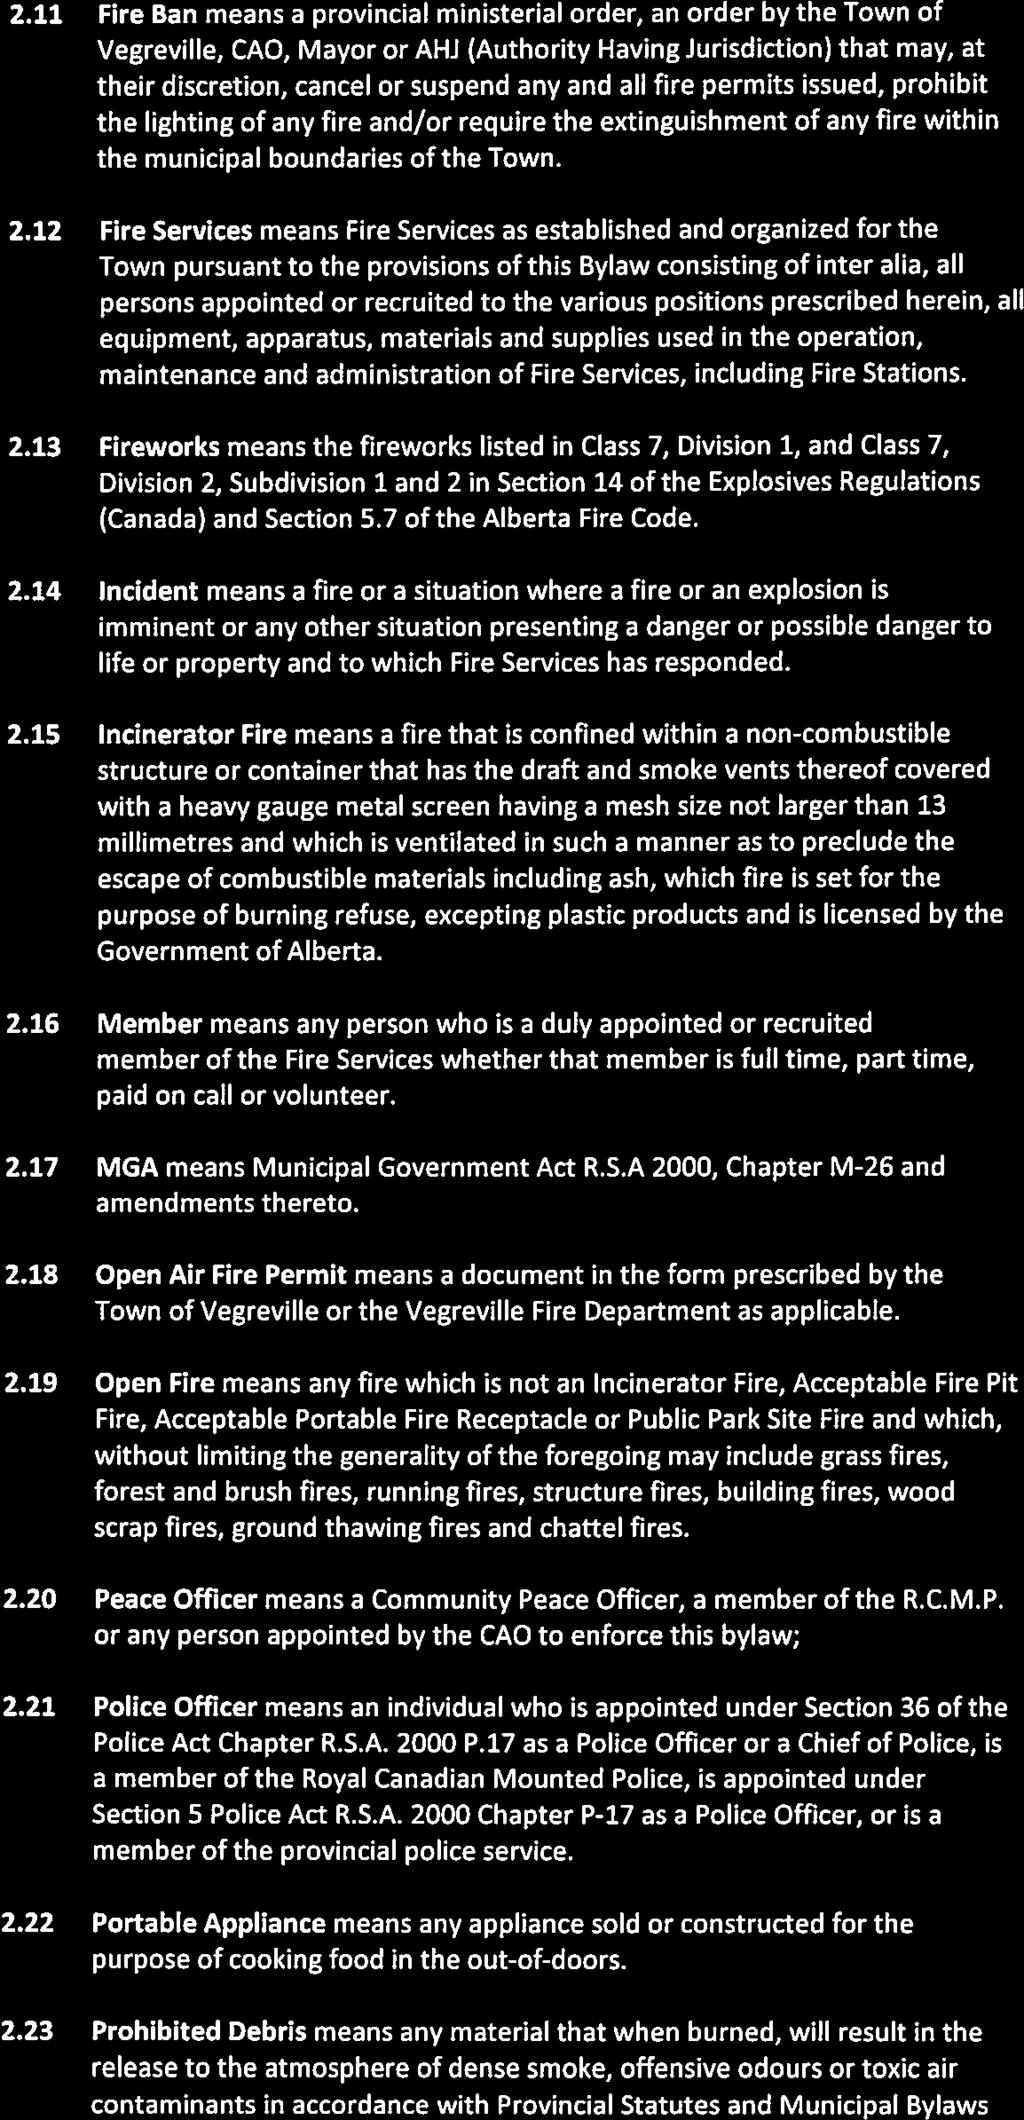 2.11 Fire Ban means a provincial ministerial order, an order by the Town of Vegreville, CAO, Mayor or AHJ (Authority Having Jurisdiction) that may, at their discretion, cancel or suspend any and all